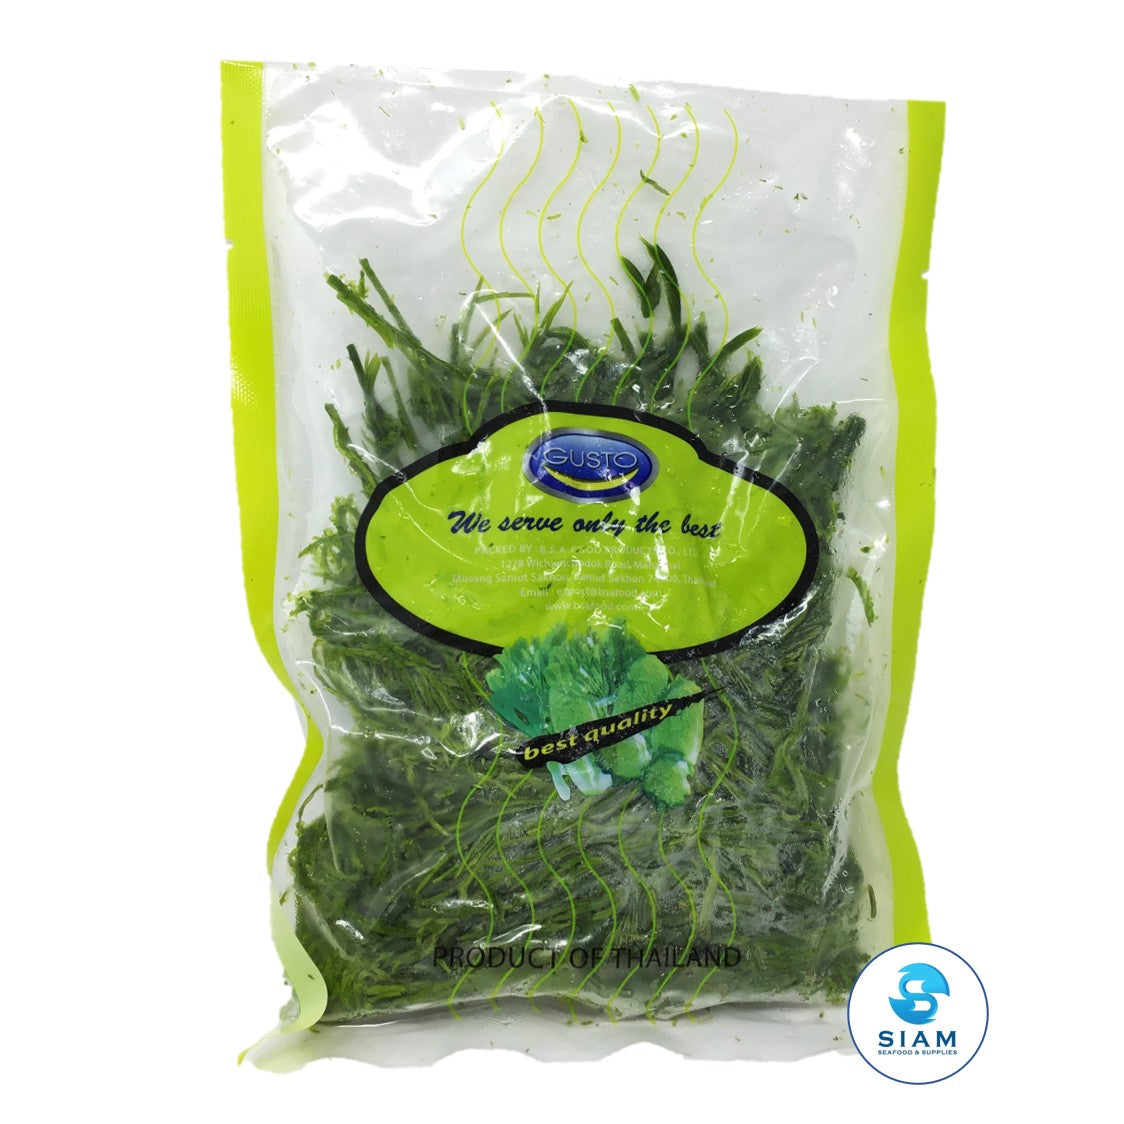 Cha-om Leaves (Leaves only), Frozen - Gusto (4 oz) ชะอม แบบใบล้วน Gusto